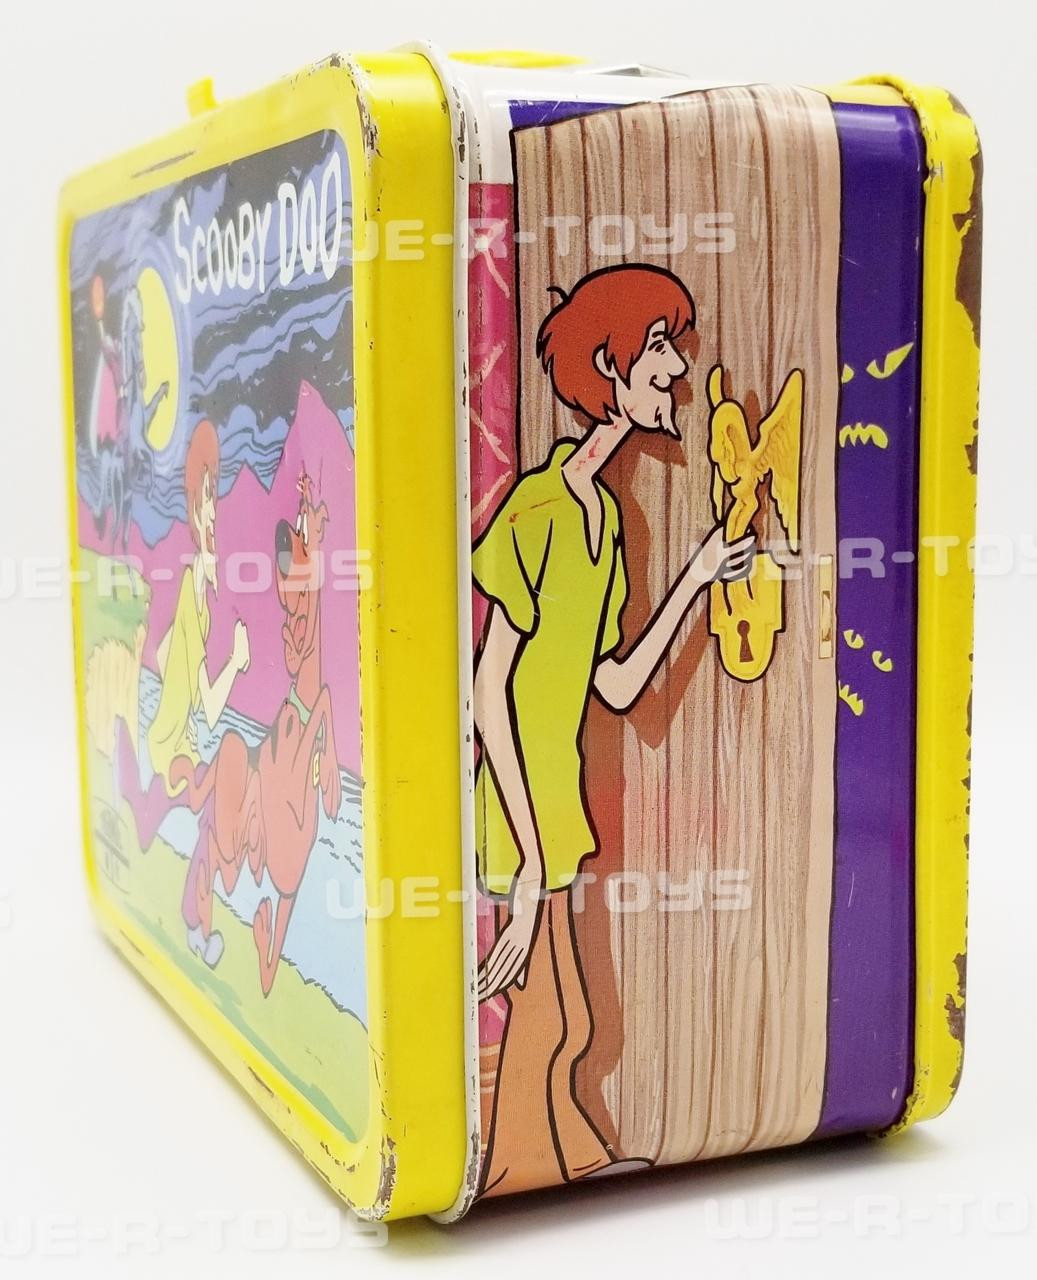 Scooby Doo Music Band Tin Lunch Box With 100 Piece Puzzle, Scoobypedia